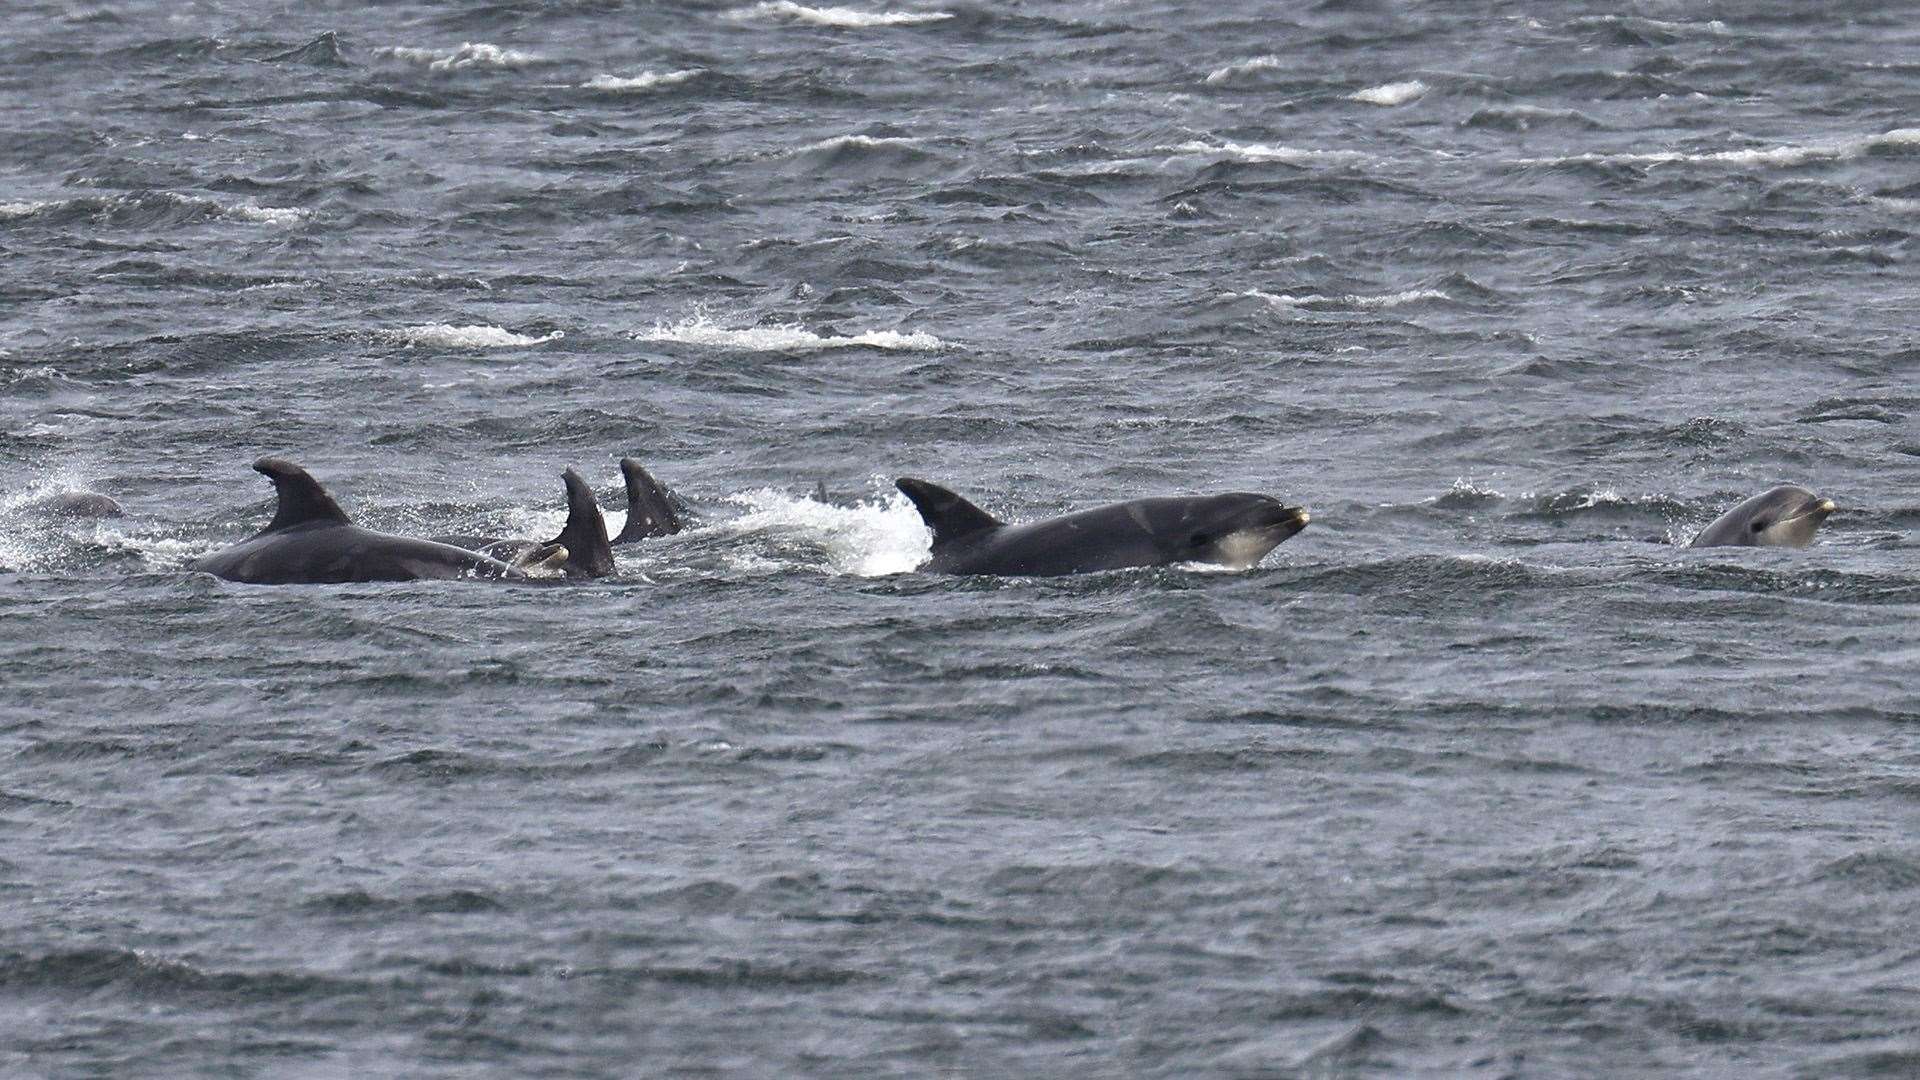 About 50 dolphins were seen in the shallow water near Nigg. Picture: WDC/Charlie Phillips.